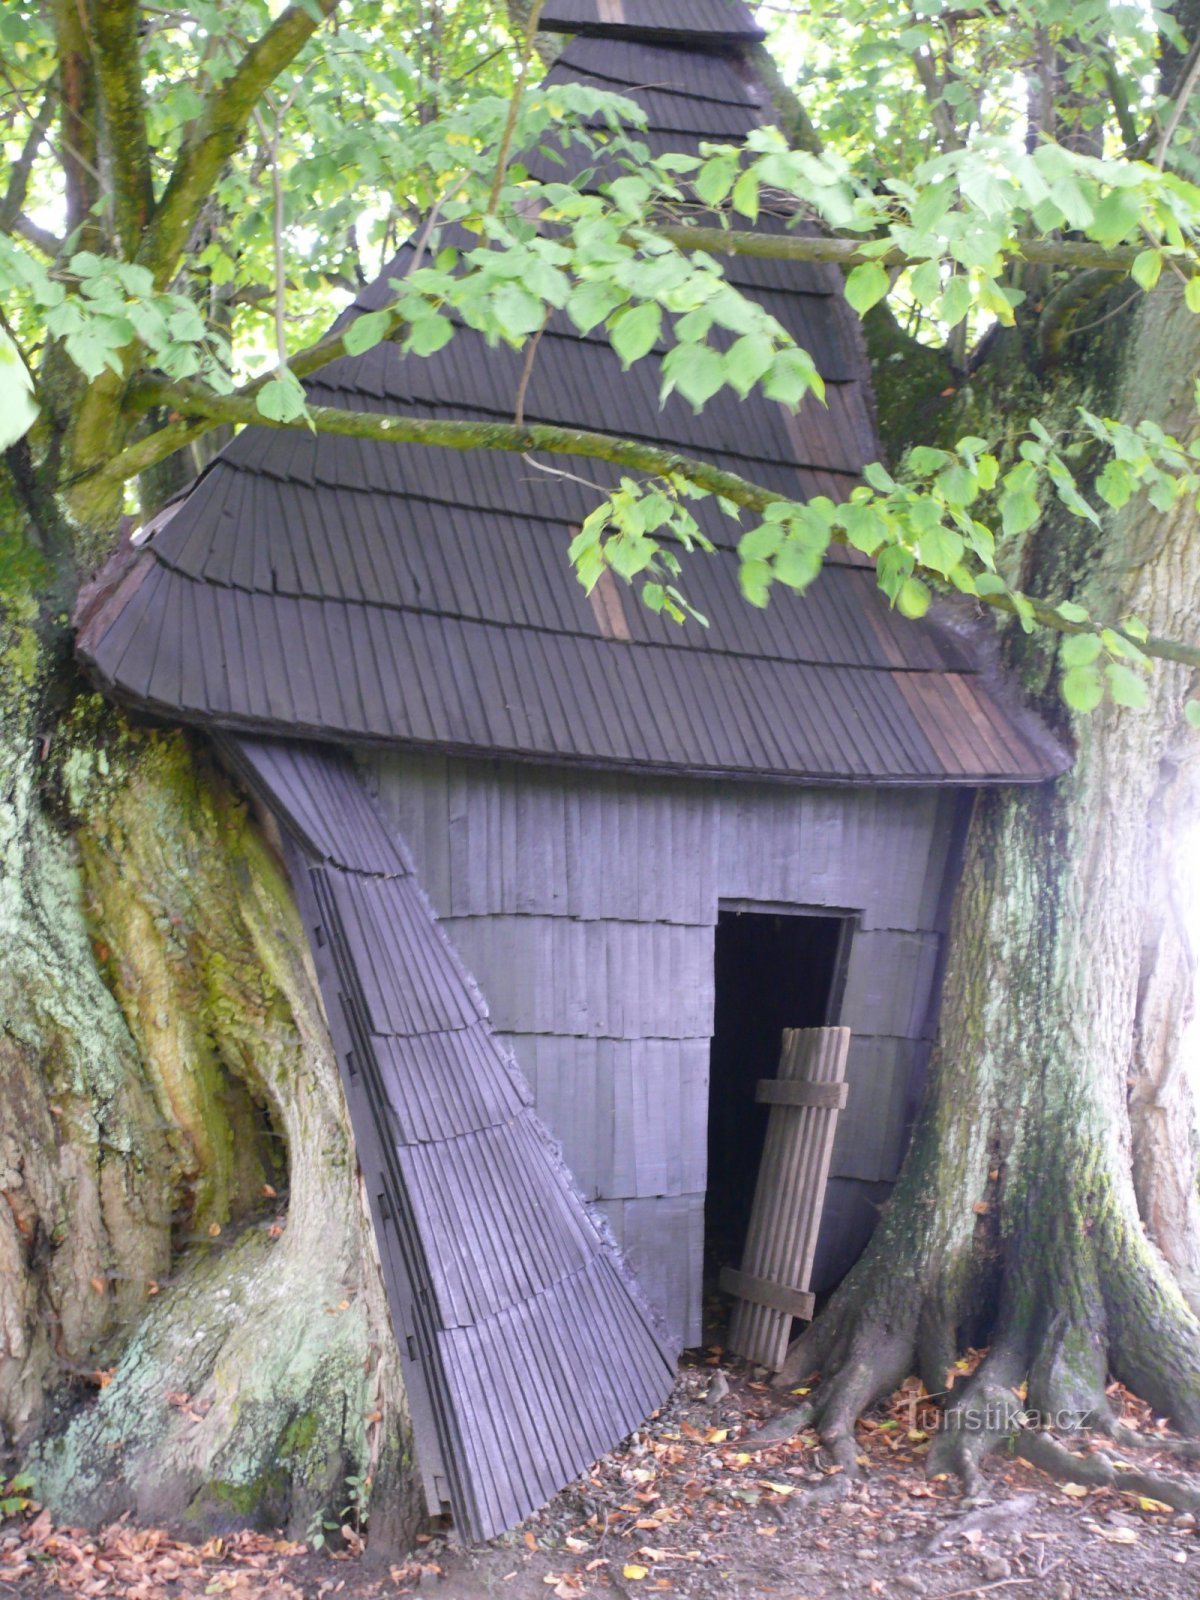 A shelter in the hollow of the trunk